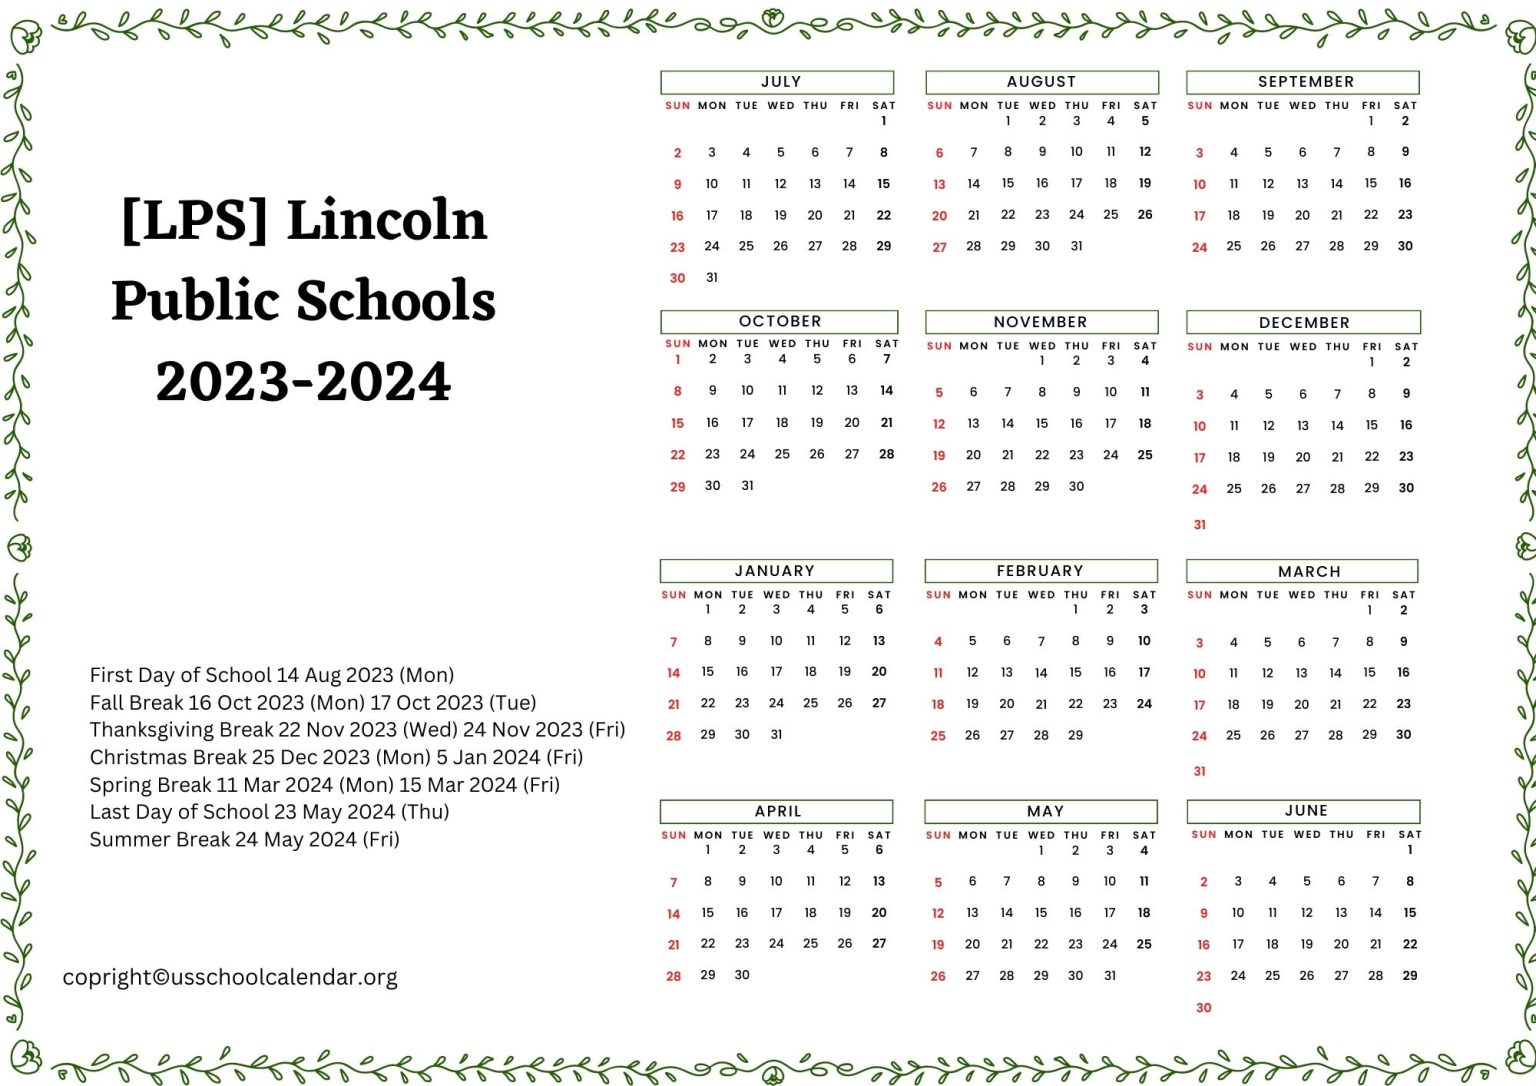 [LPS] Lincoln Public Schools Calendar with Holidays 20232024